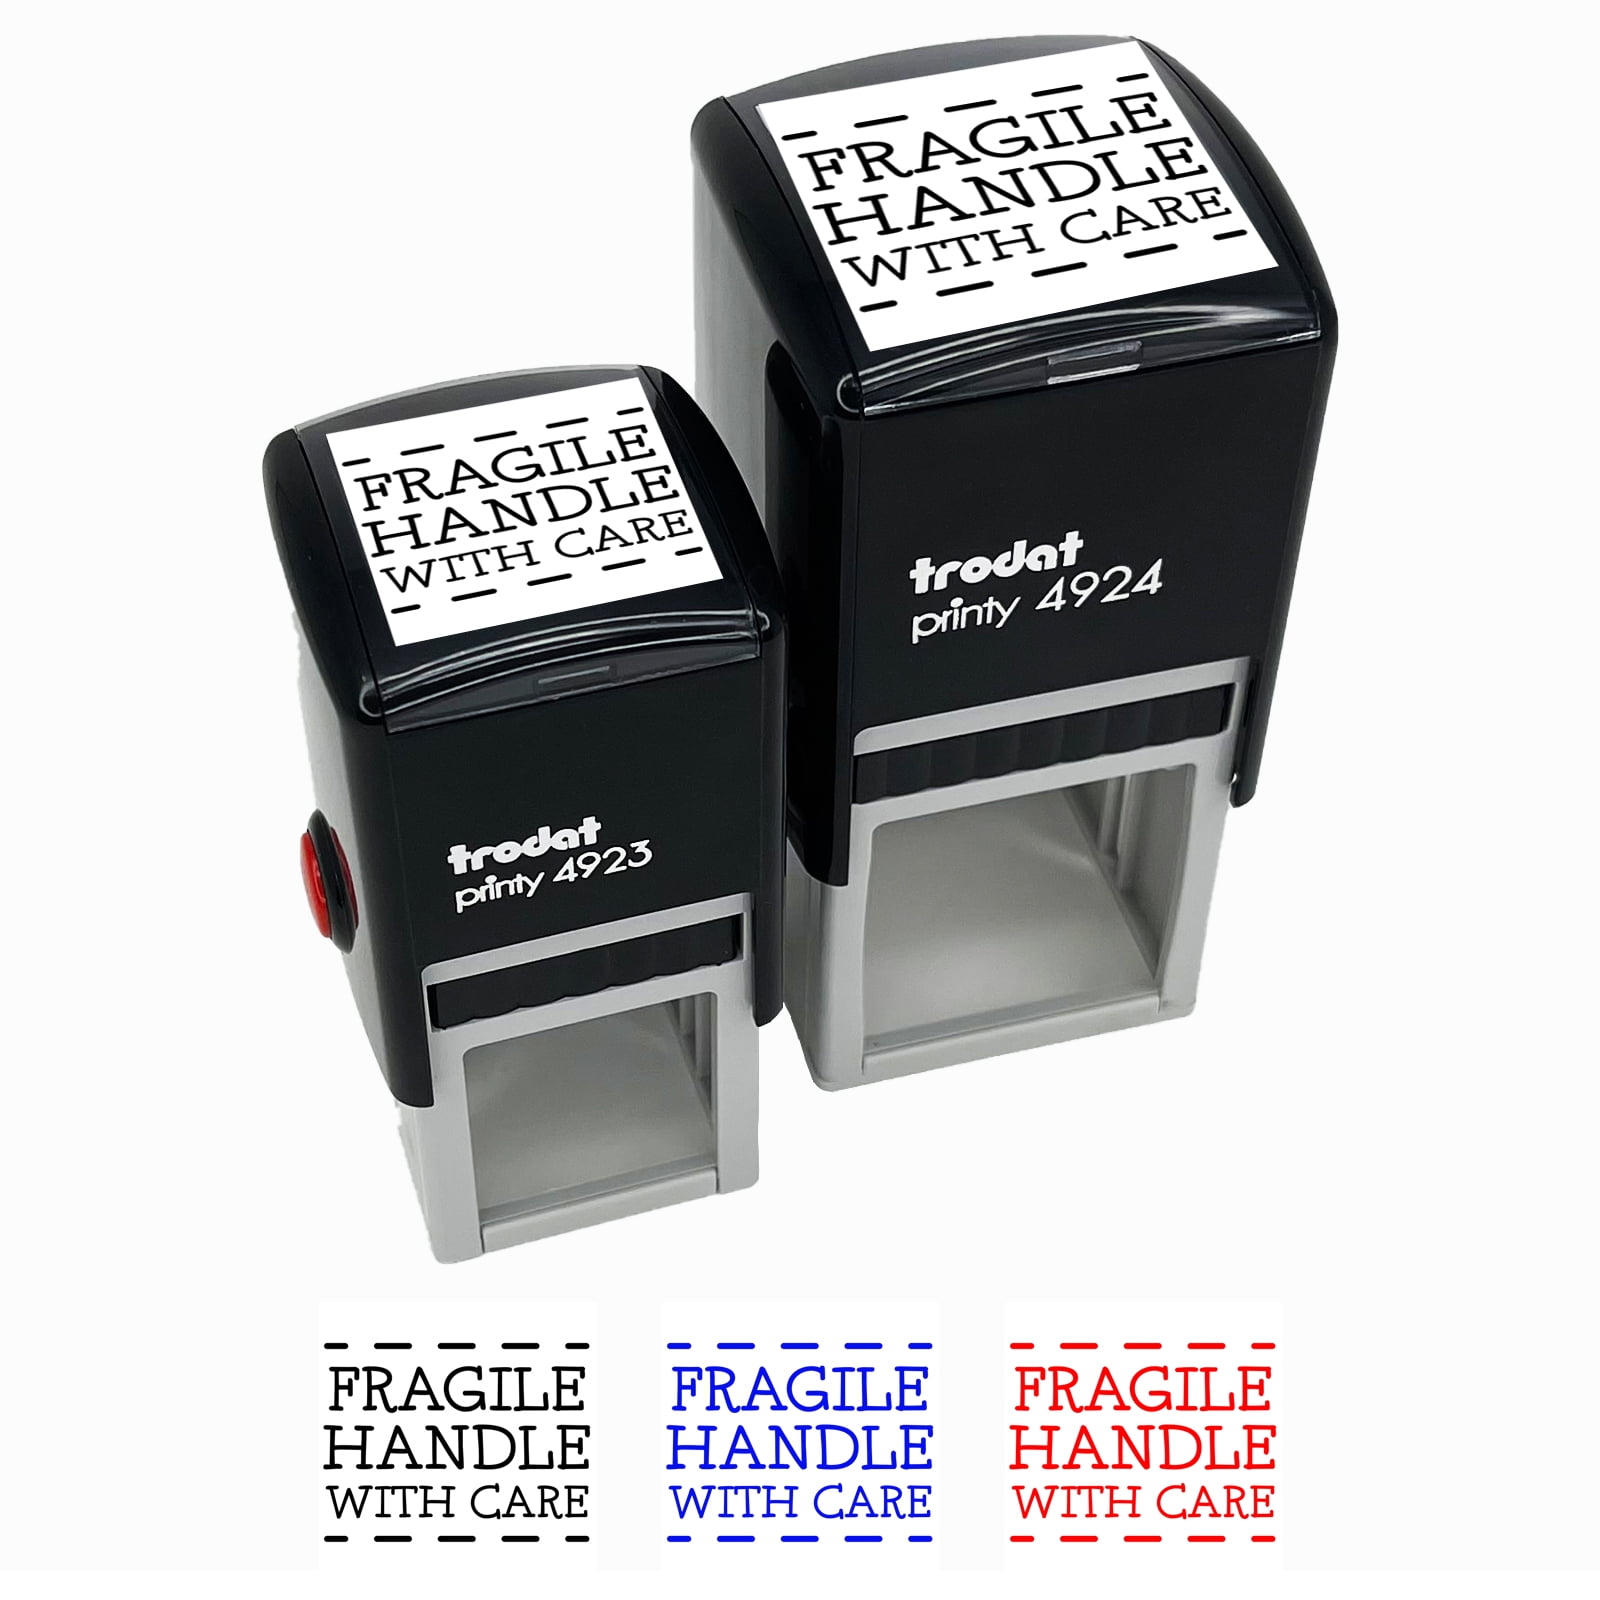 FRAGILE HANDLE WITH CARE Office Self Inking Rubber Stamp Red Ink E-5529 